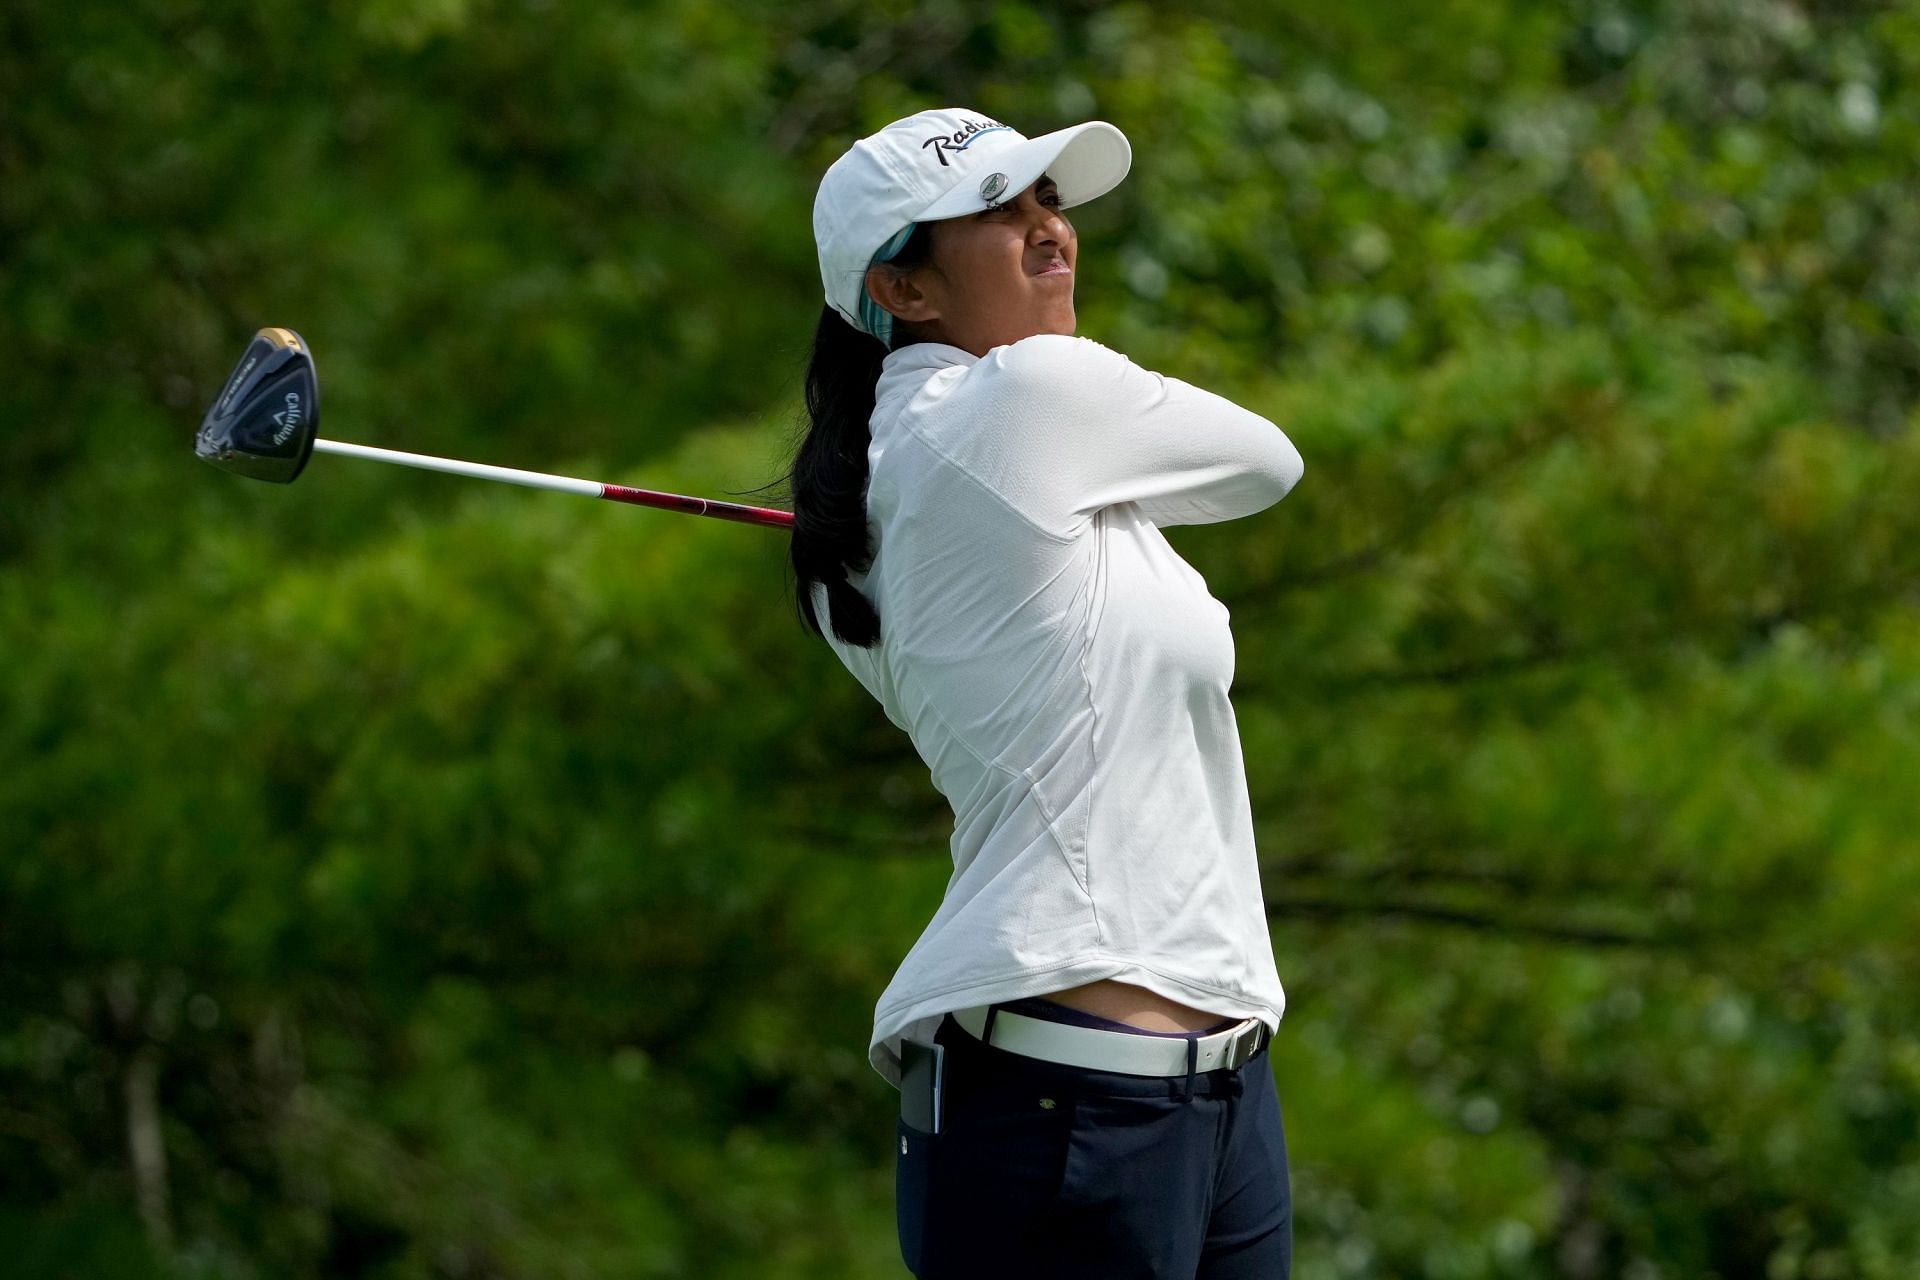 “Just one of those days” - Four-time LET winner Aditi Ashok stun fans ...